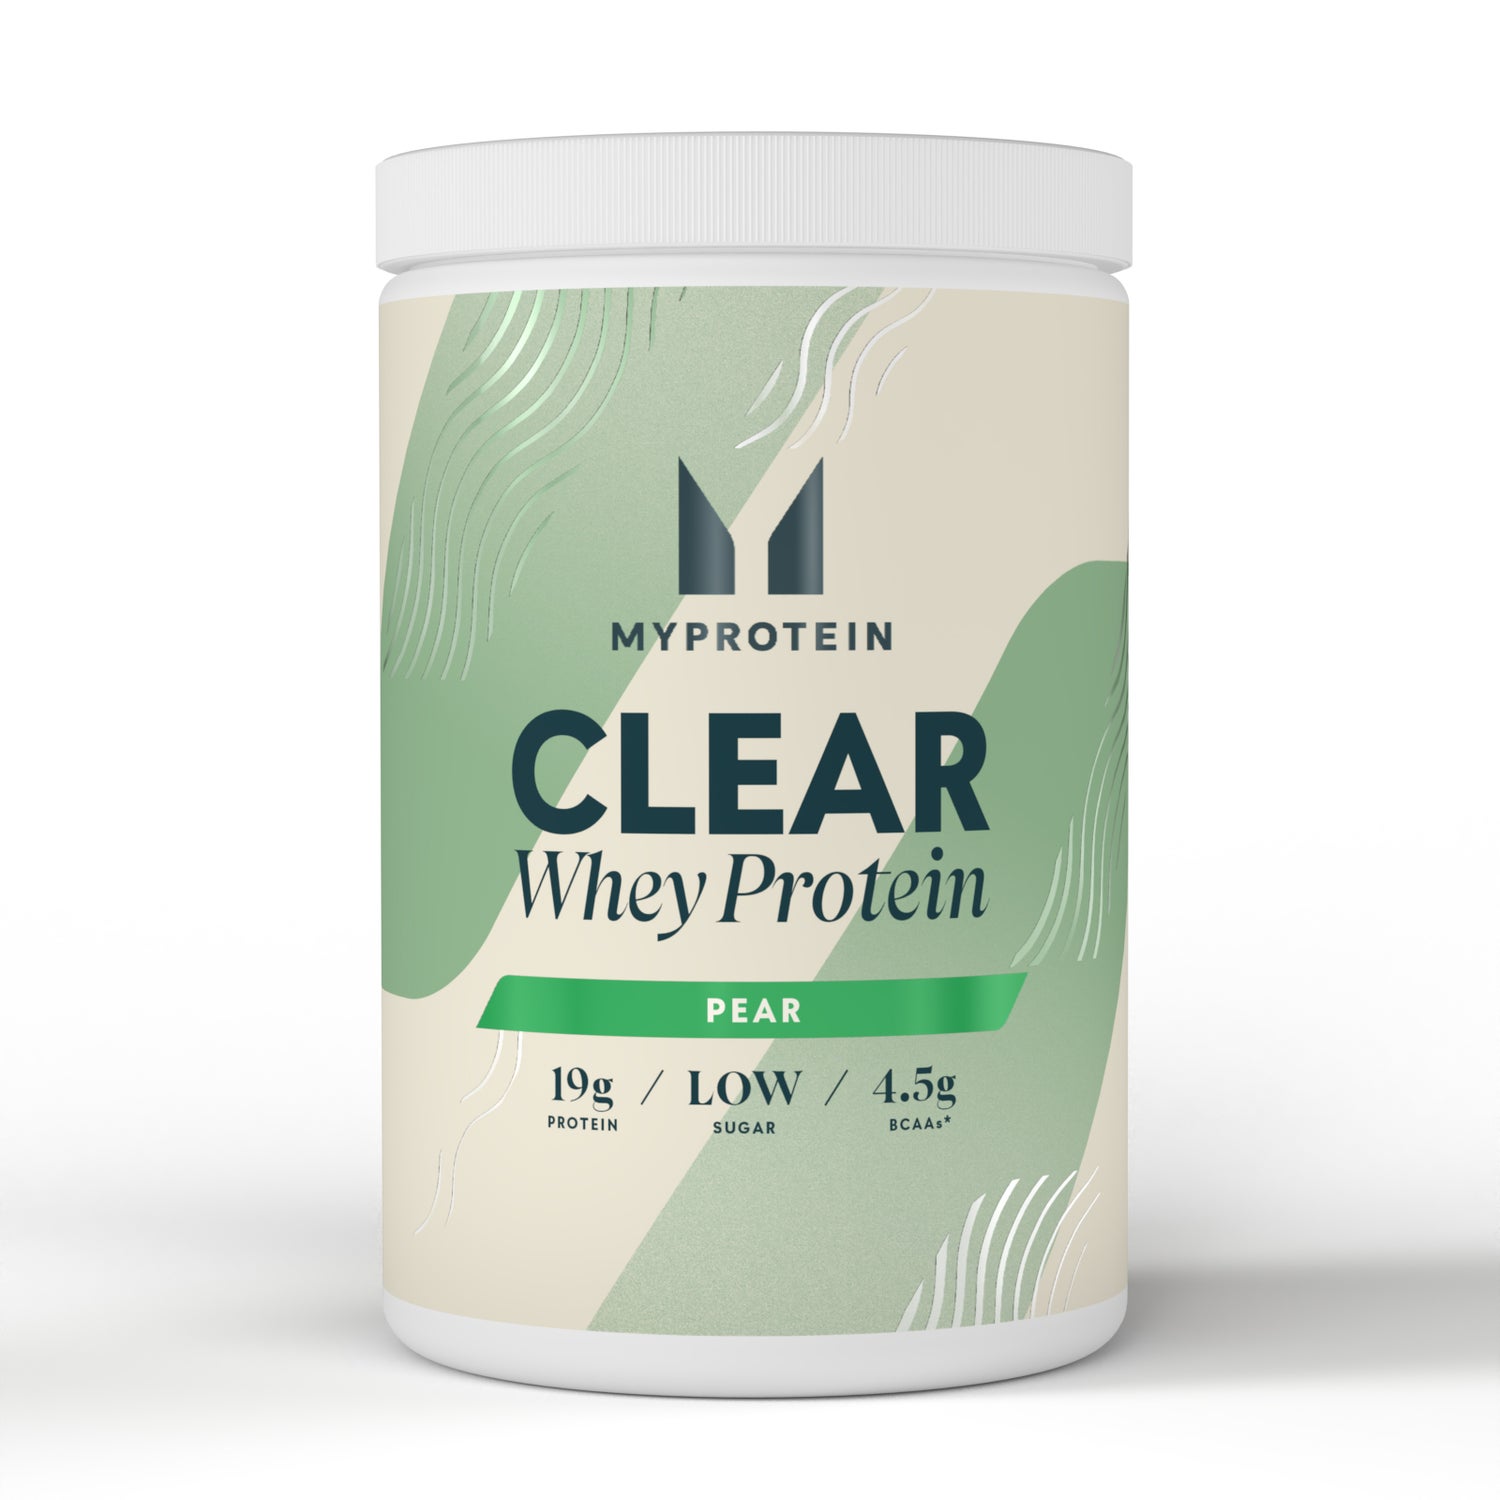 Myprotein Clear Whey Isolate (ASIA) (ALT) - 20servings - Pear